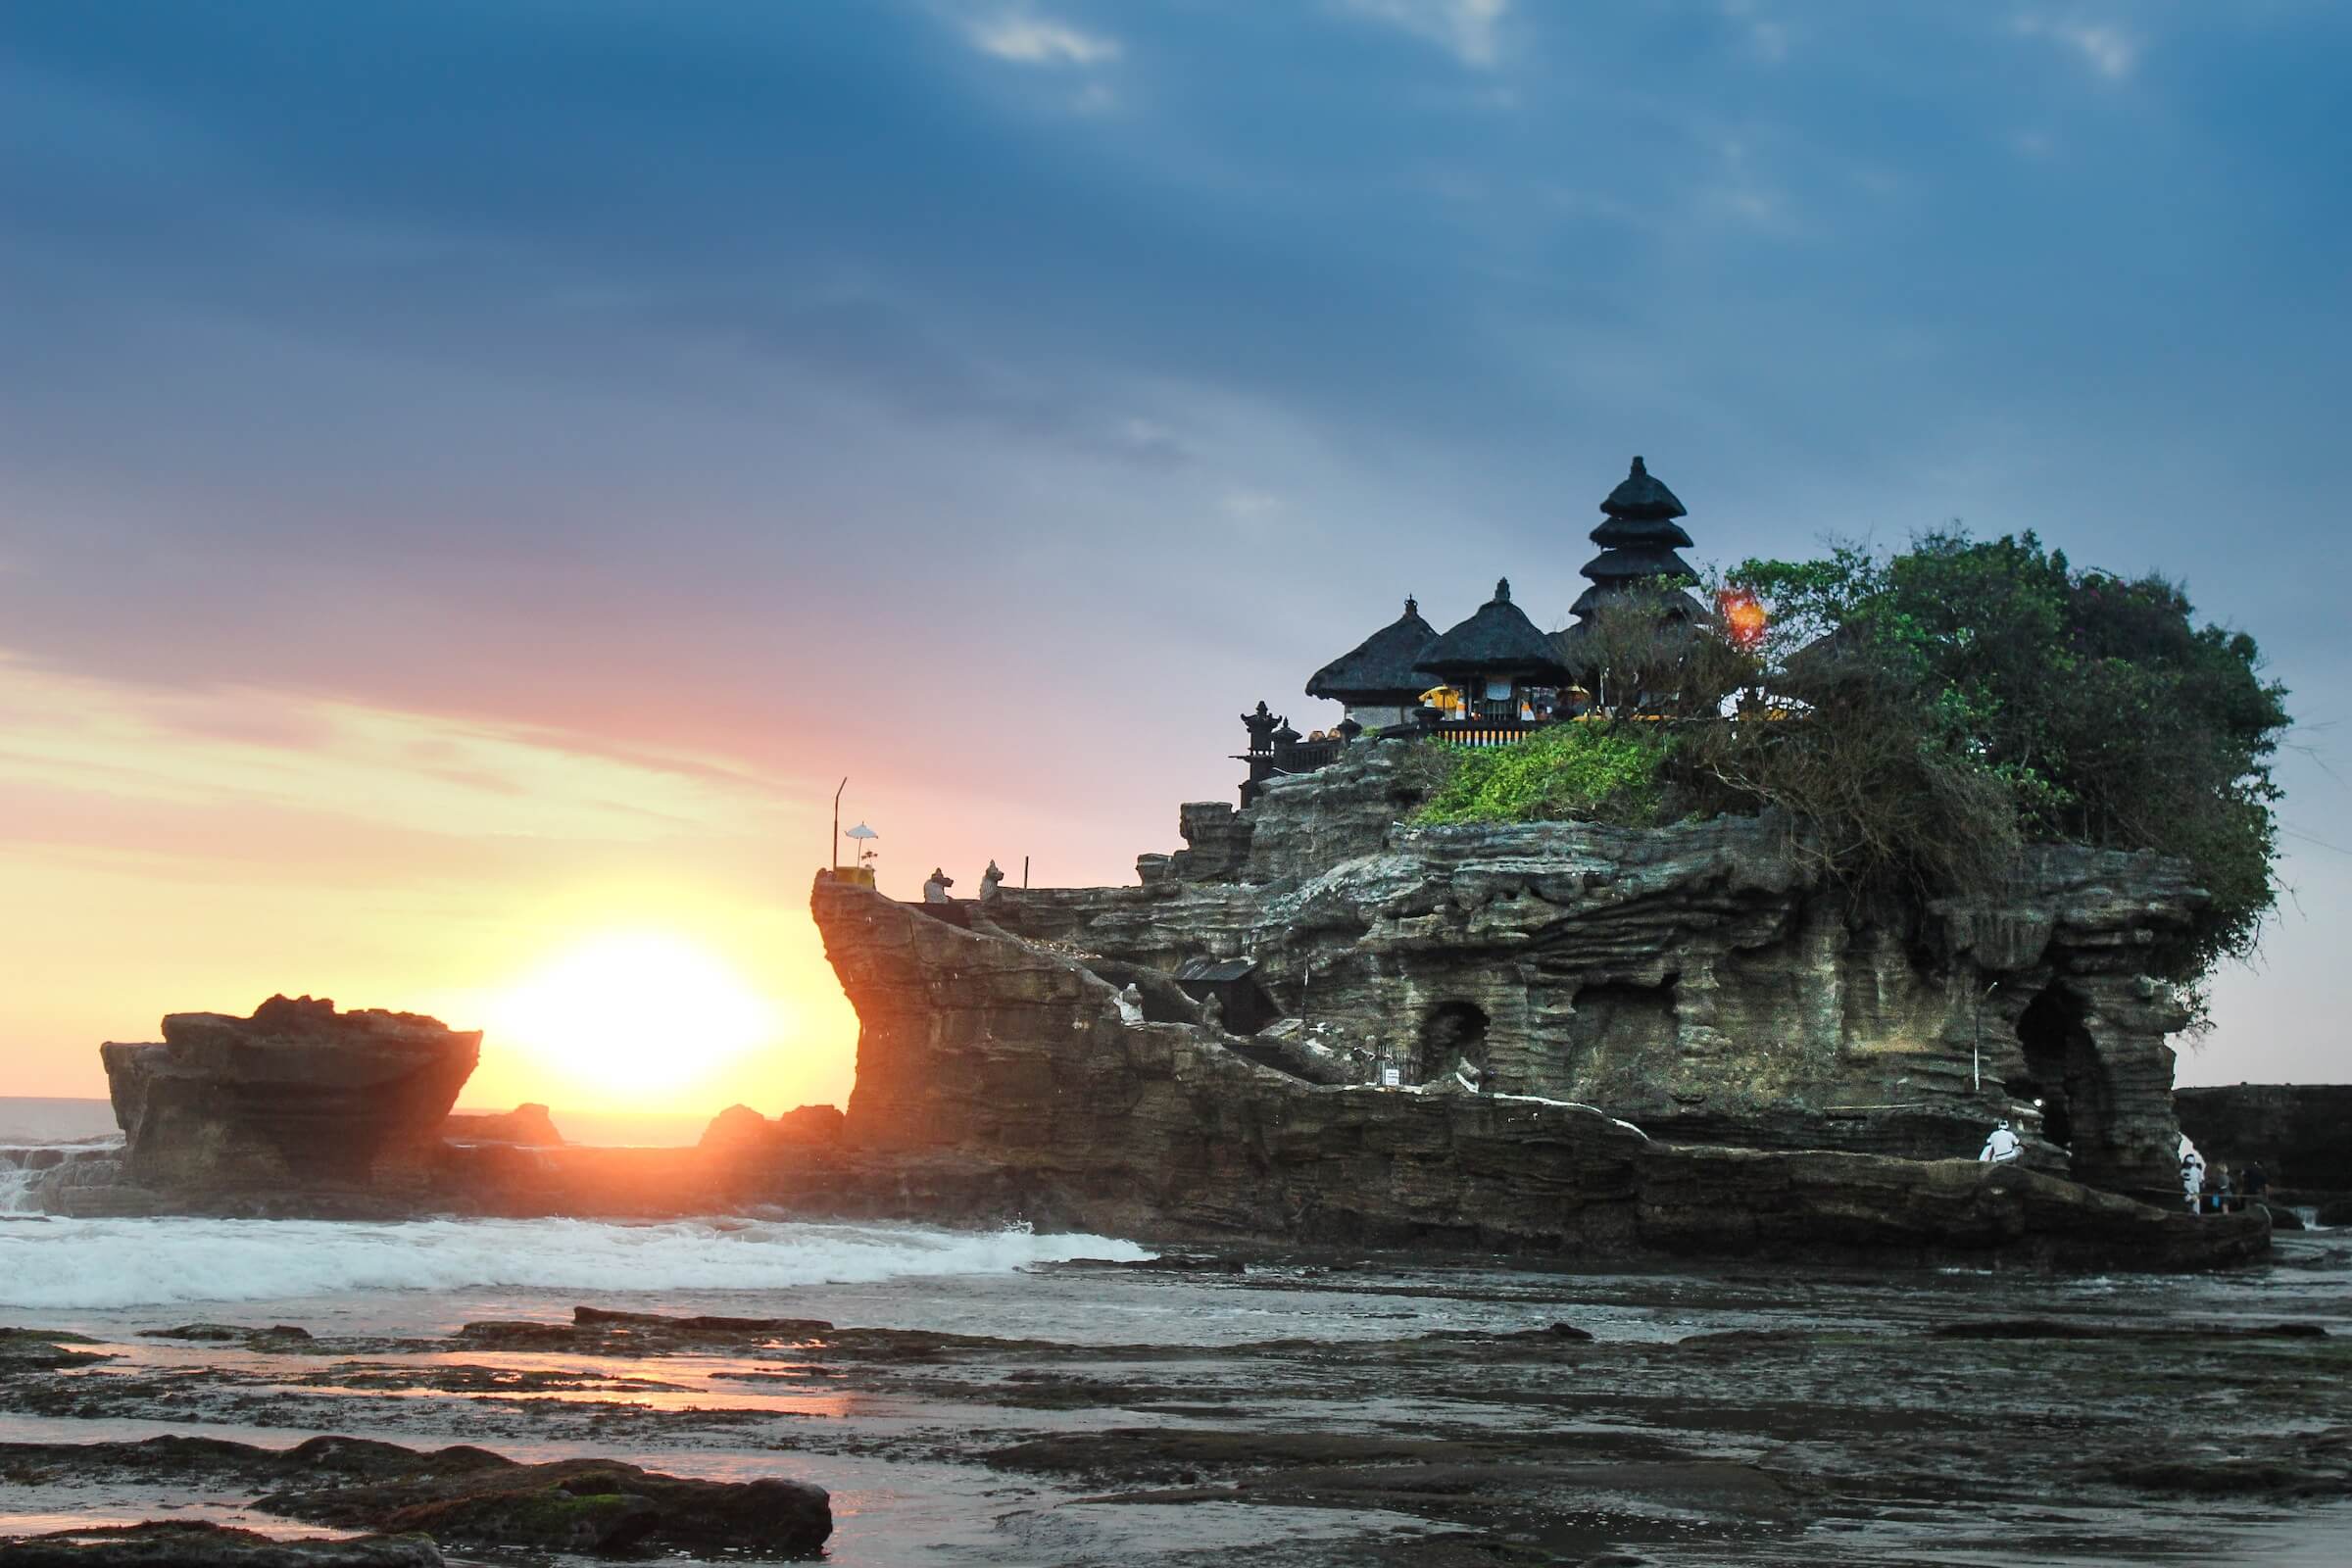 7 days in Bali itinerary, An image of Tanah Lot during sunset with the sun just above the horizon and between the two rocky outcrops of Tanah Lot Temple